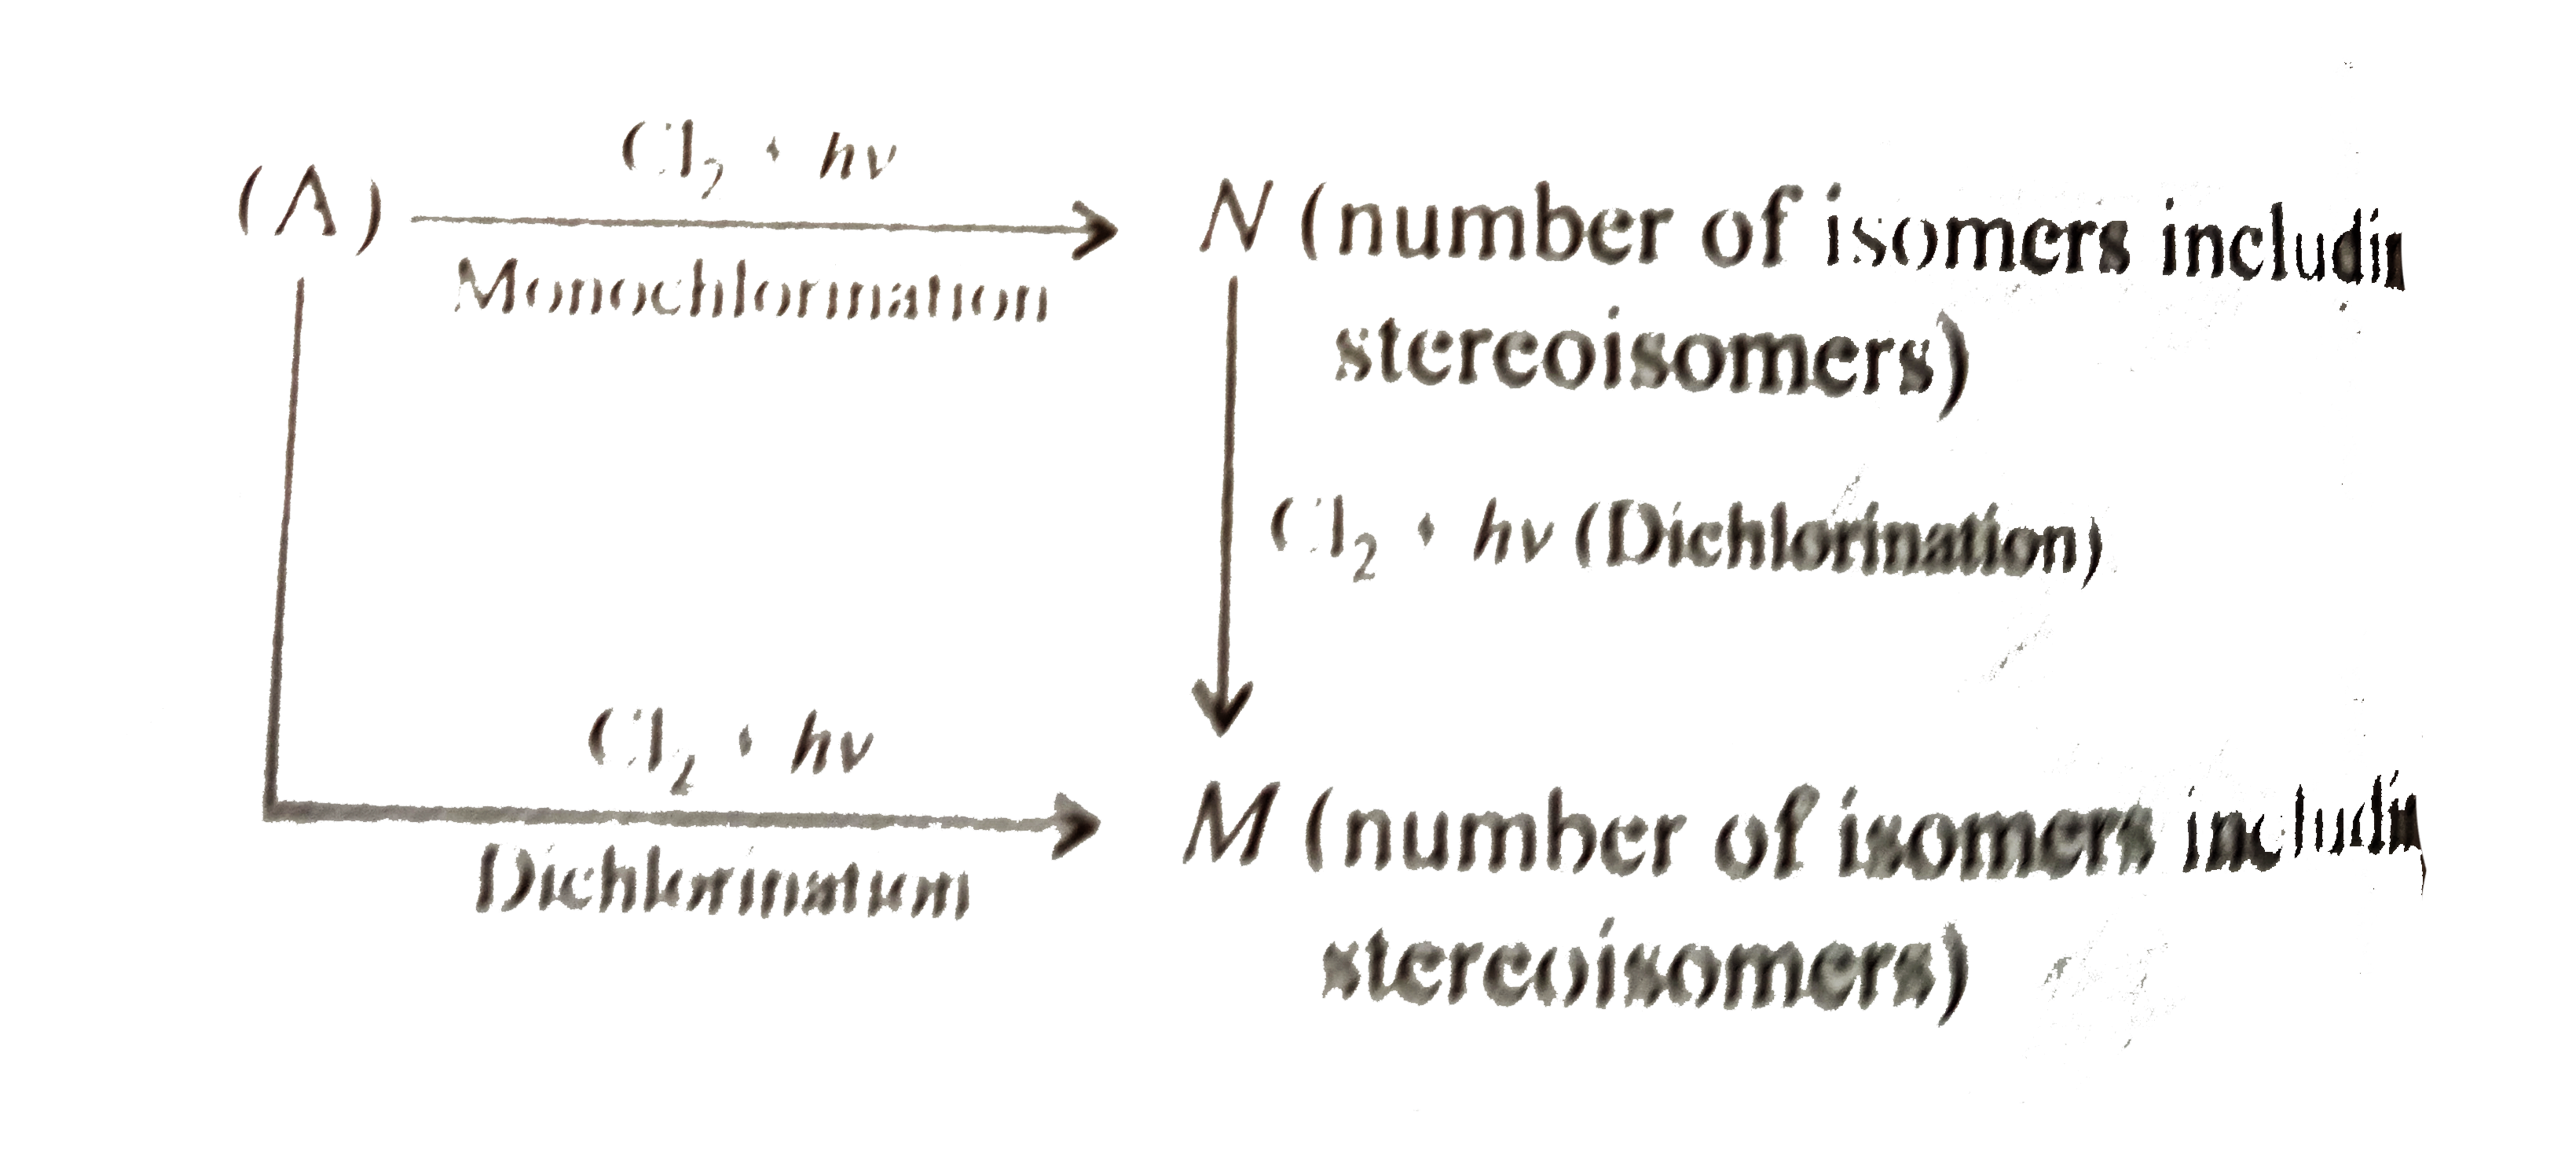 Fifteen milliliters of gaseous hydrocarbo (A) was required for complete combustion 357 ml of air (21 % oxygen by volume) and gaseous products occupied 327 ml (all volumes being measured at STP).       The molecular formula of the hydrocarbon (A) is: